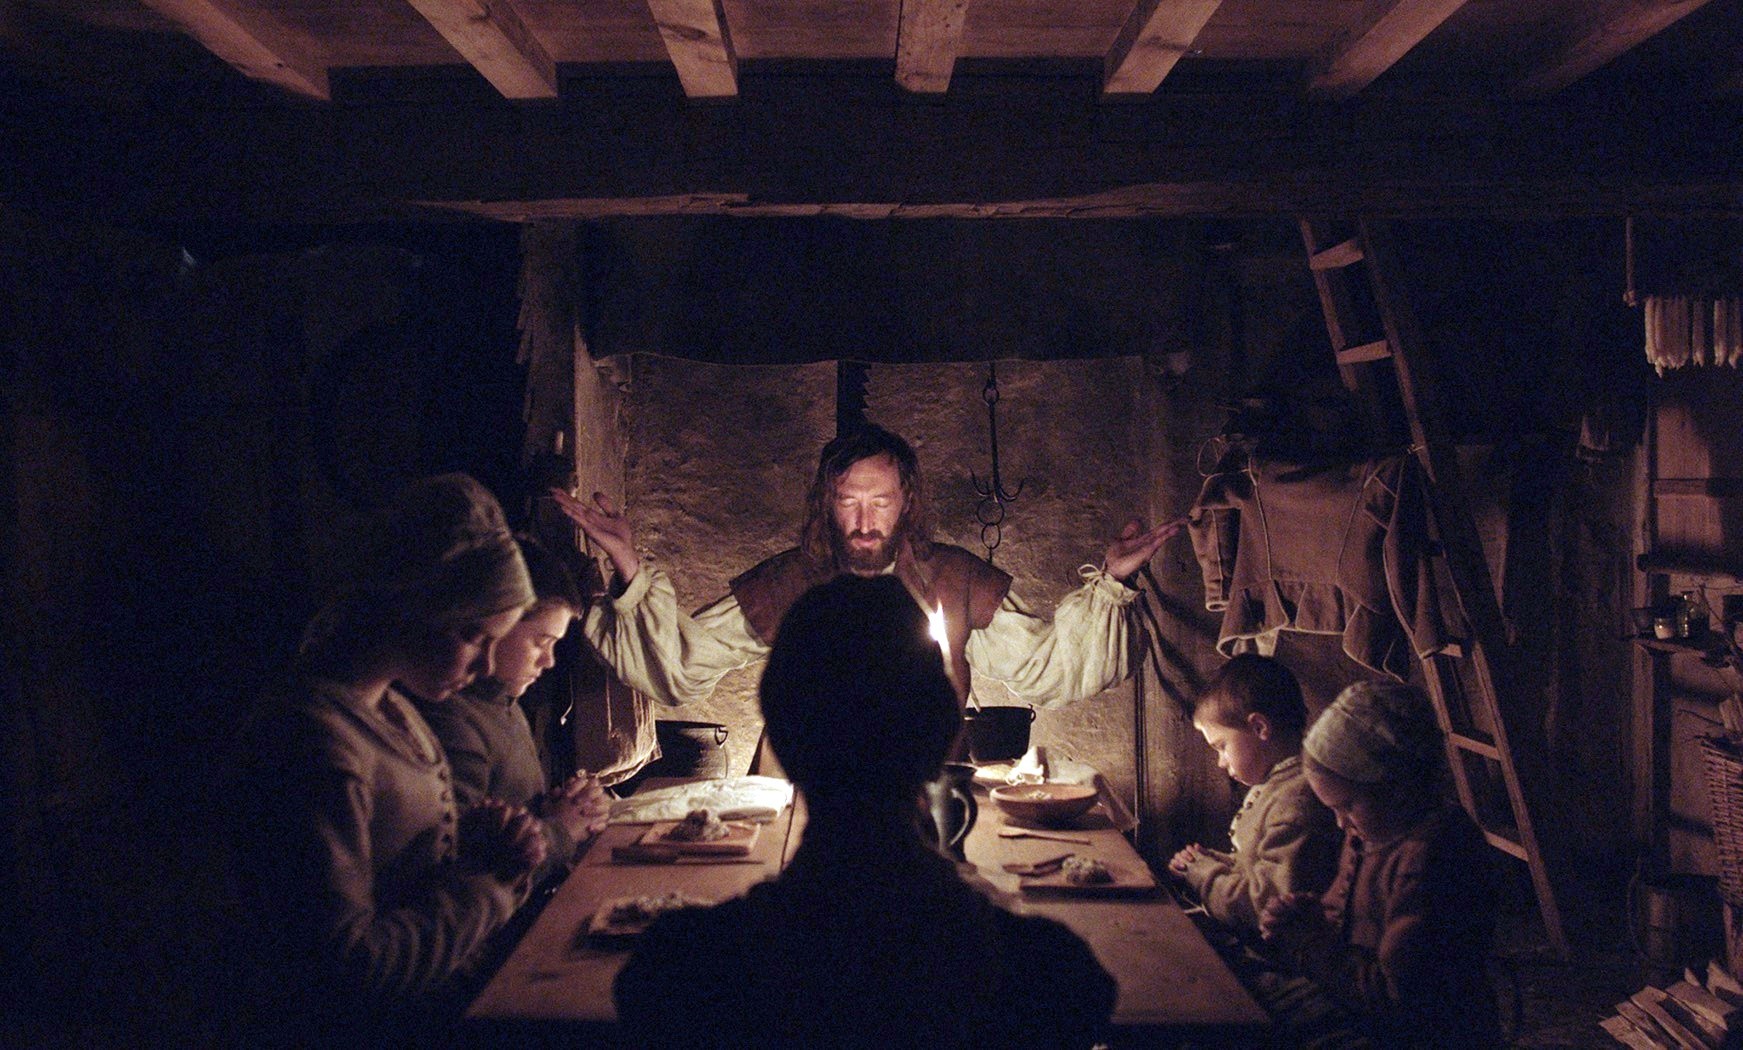 Ralph Ineson stars as William in A24's The Witch (2015)